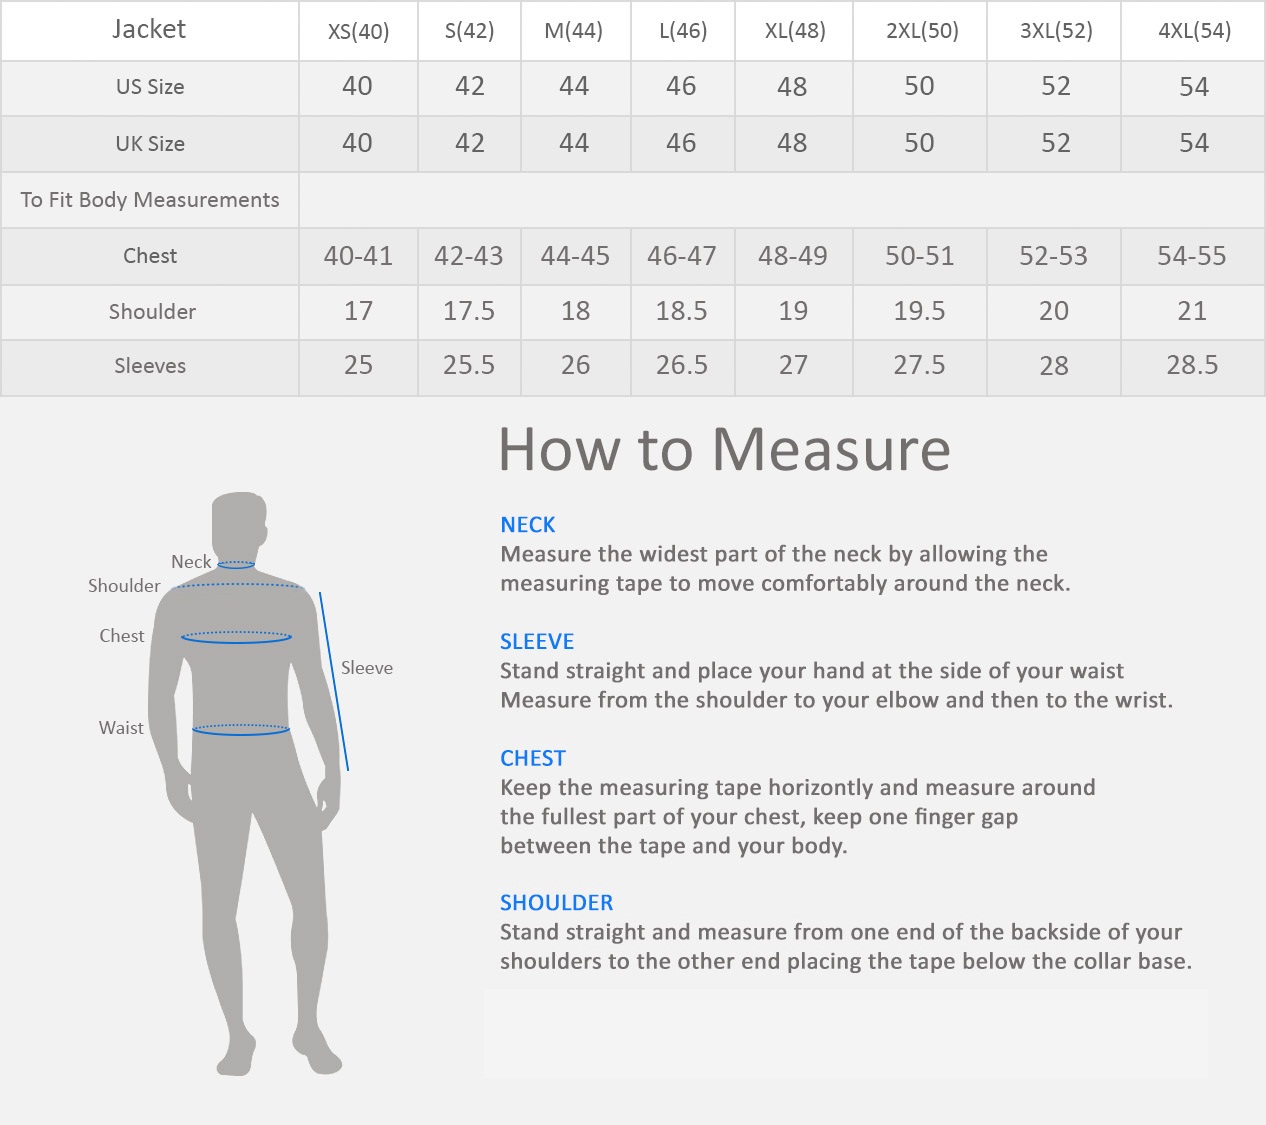 Mens Big And Size Chart